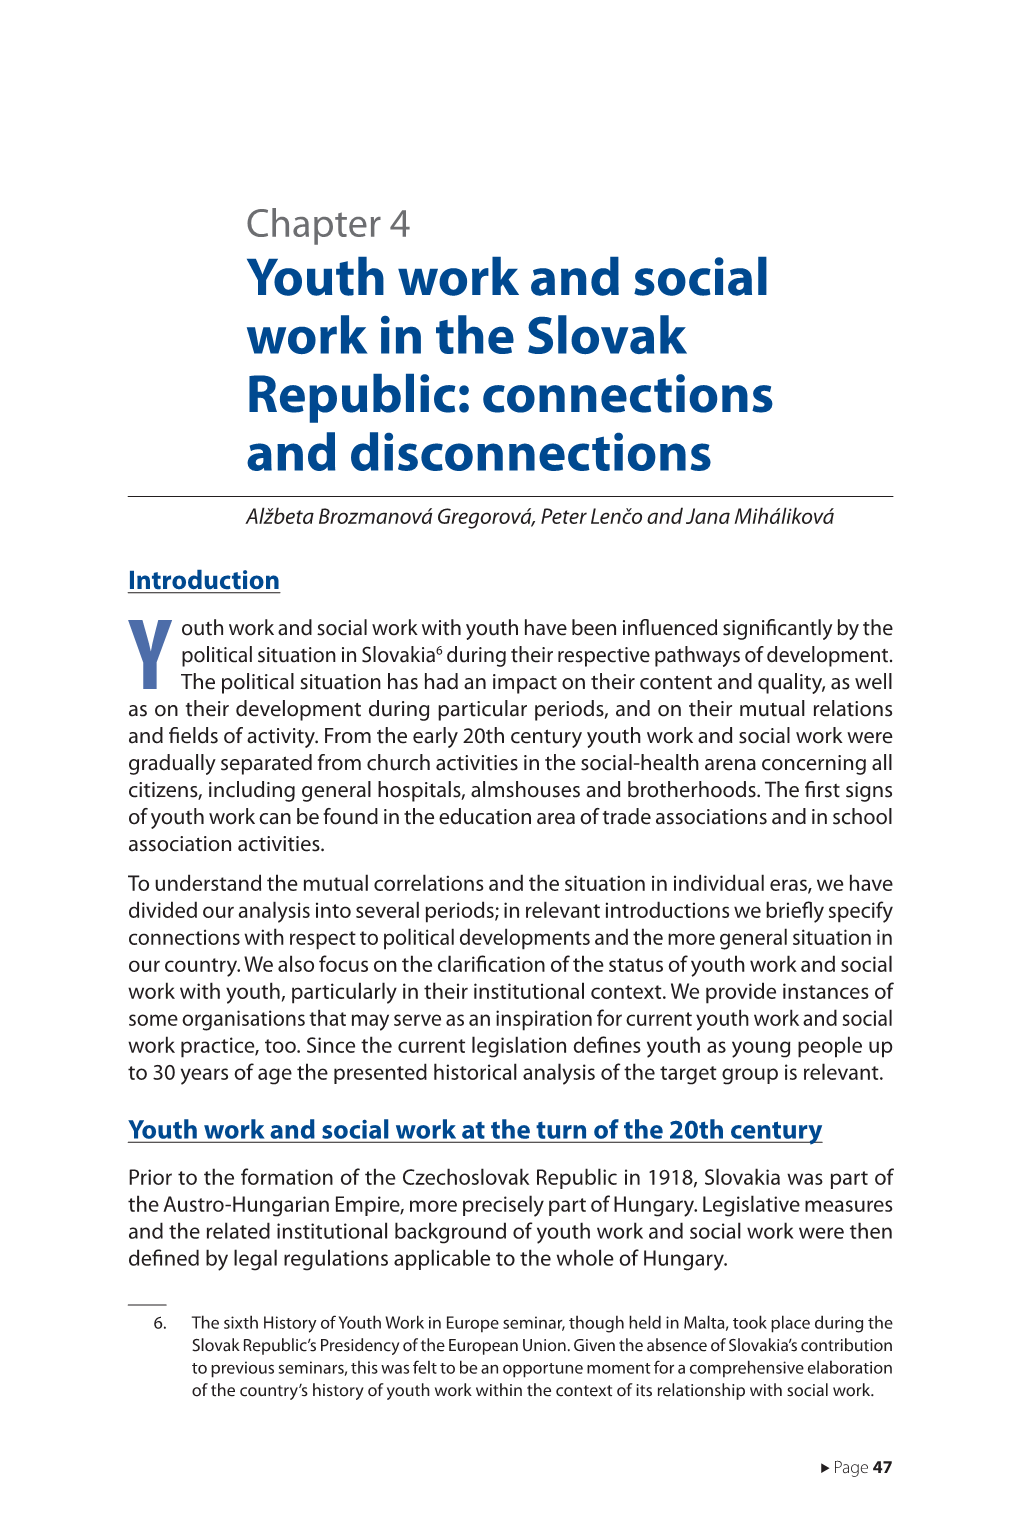 Youth Work and Social Work in the Slovak Republic: Connections and Disconnections